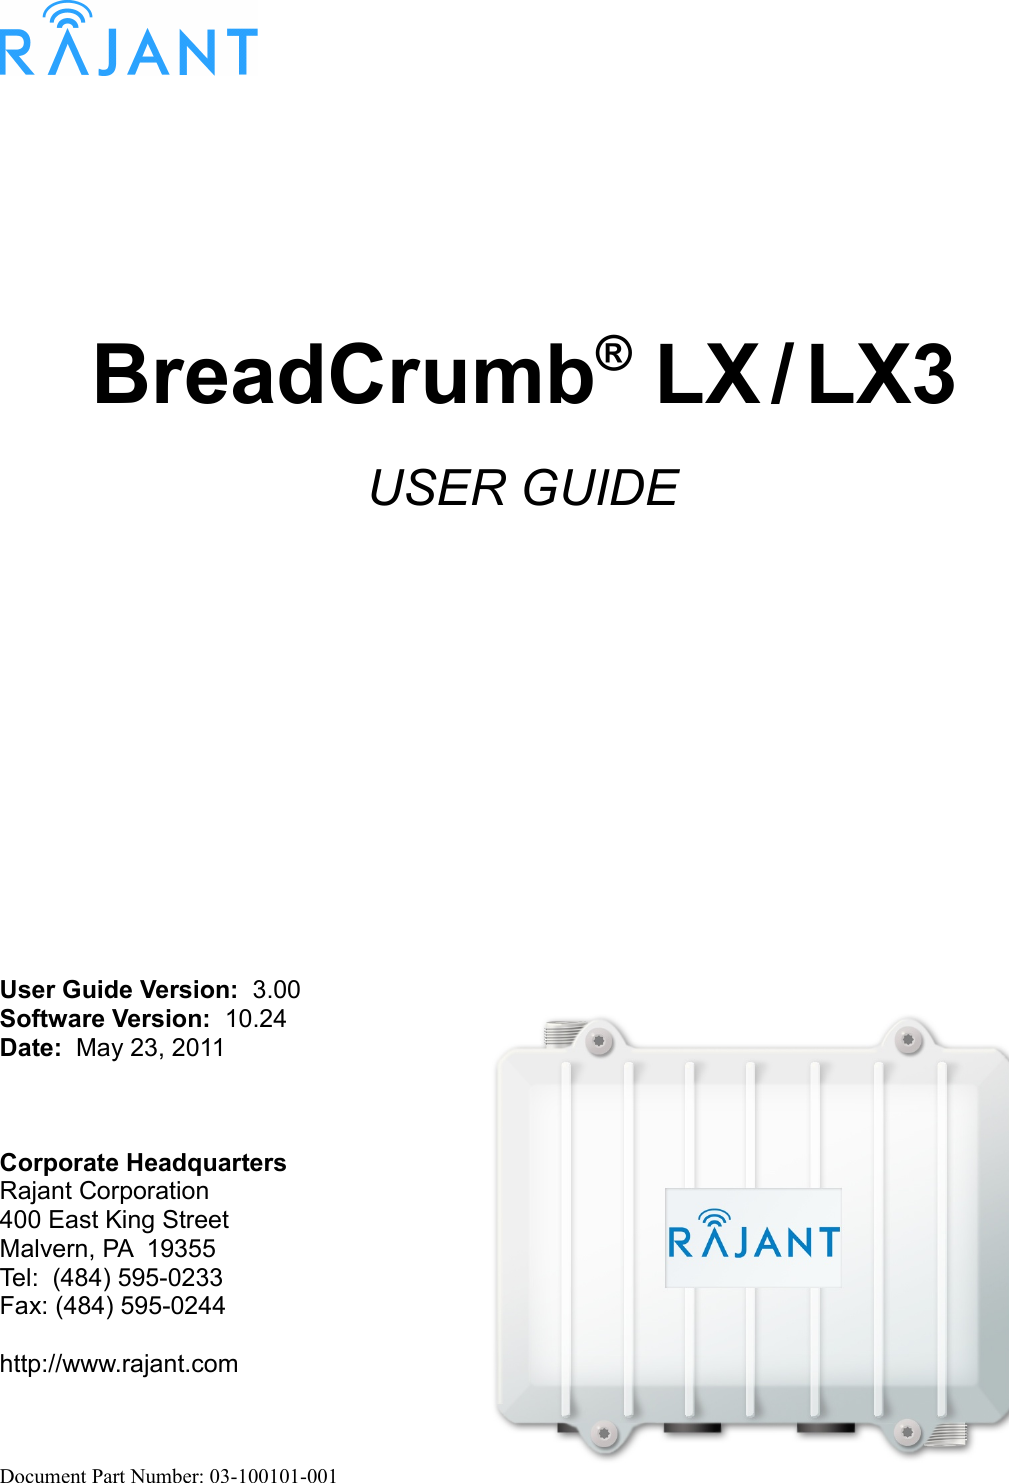 BreadCrumb® LX / LX3USER GUIDEUser Guide Version:  3.00Software Version:  10.24Date:  May 23, 2011Corporate HeadquartersRajant Corporation400 East King StreetMalvern, PA  19355Tel:  (484) 595-0233Fax: (484) 595-0244http://www.rajant.comDocument Part Number: 03-100101-001